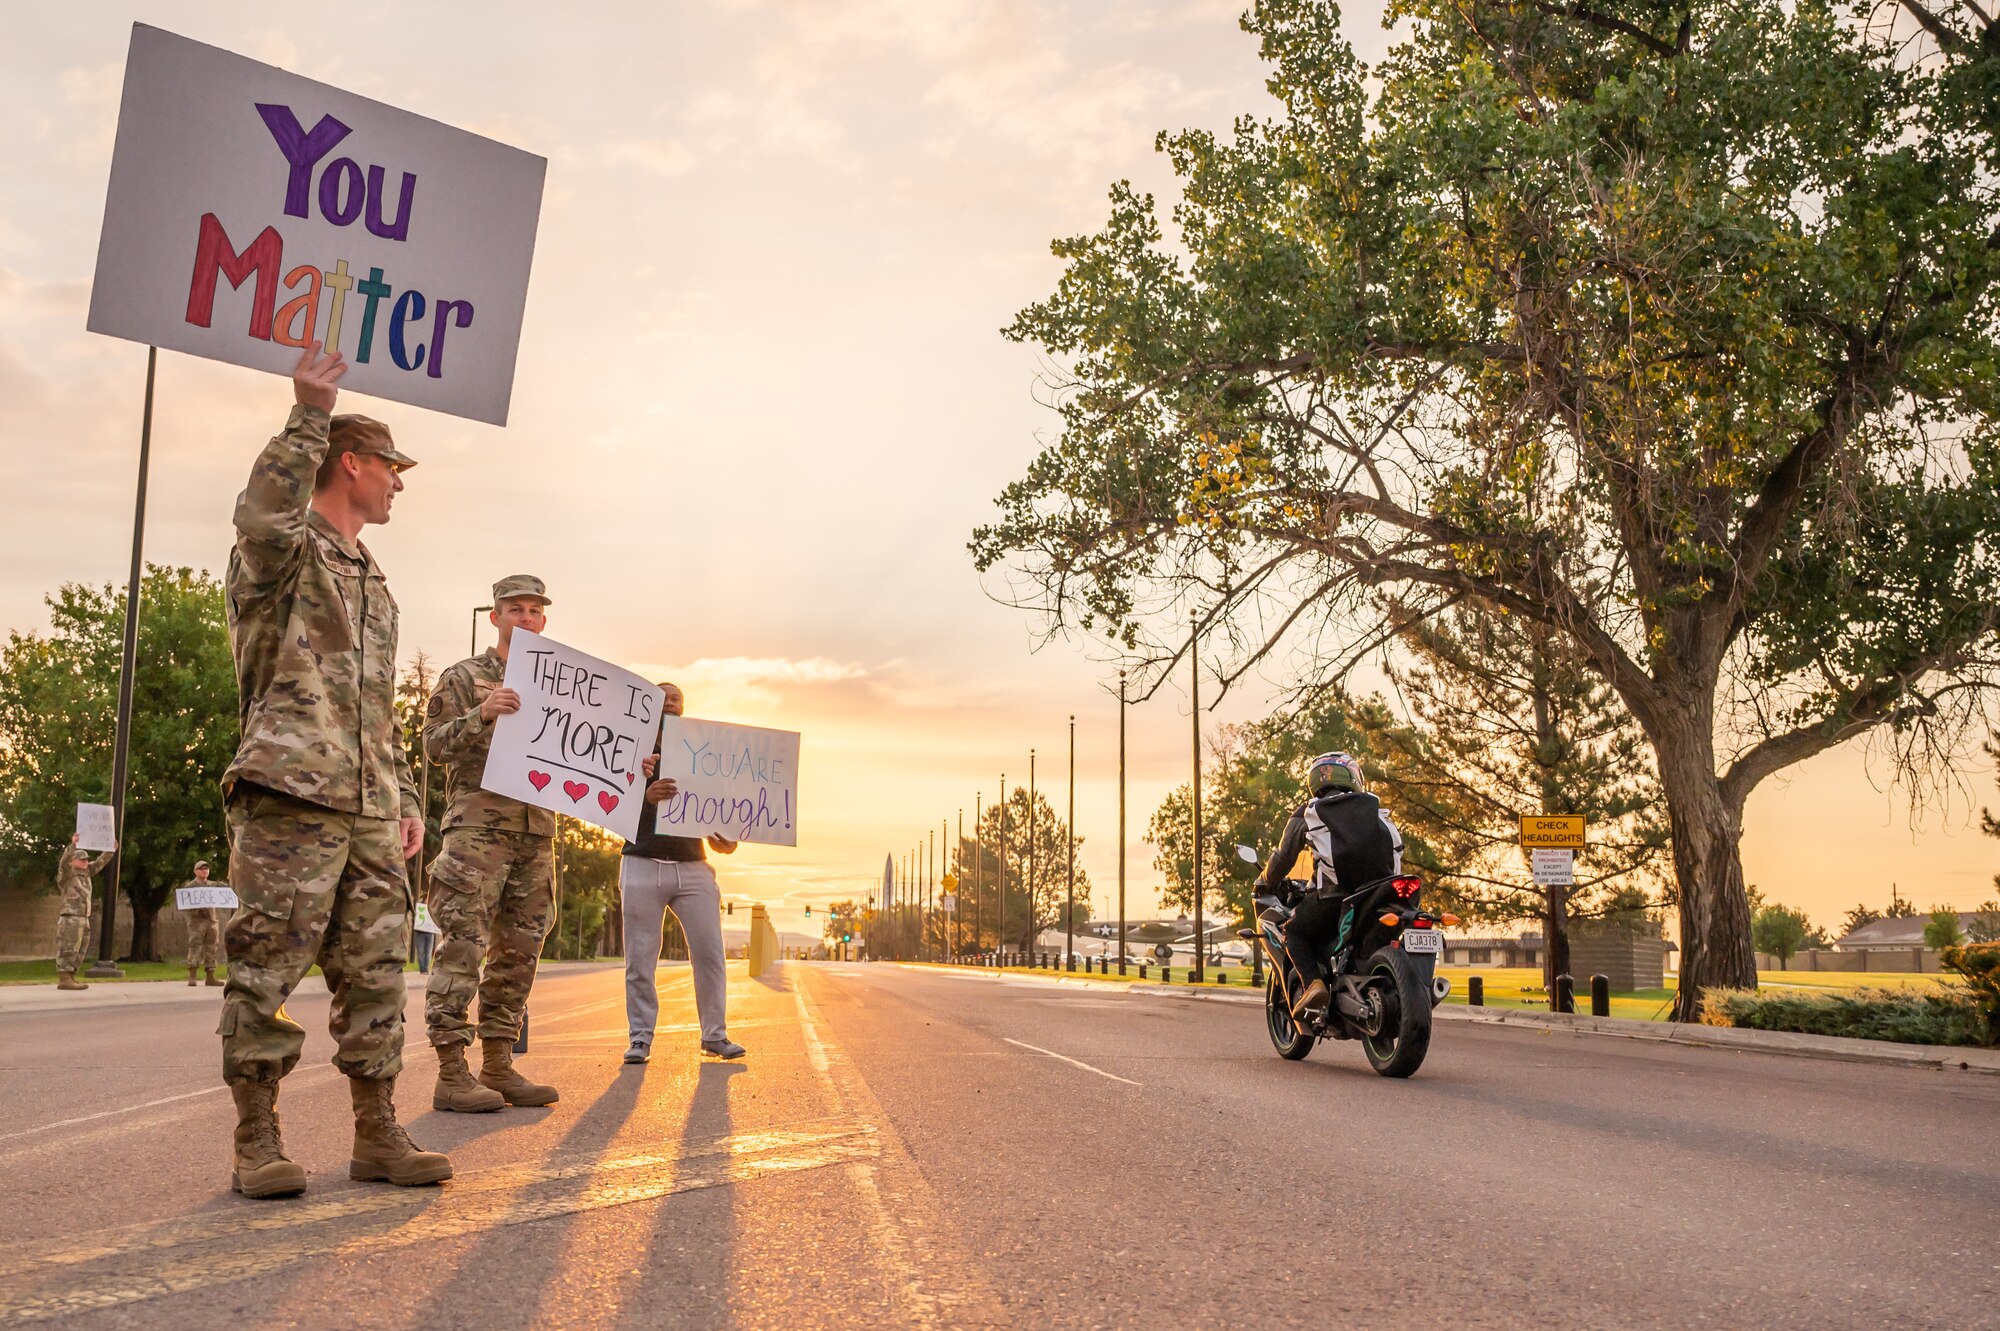 Members of the 341st Missile Wing greet people entering the installation during a Signs of Hope event Sept. 9, 2022, at Malmstrom Air Force Base, Mont.